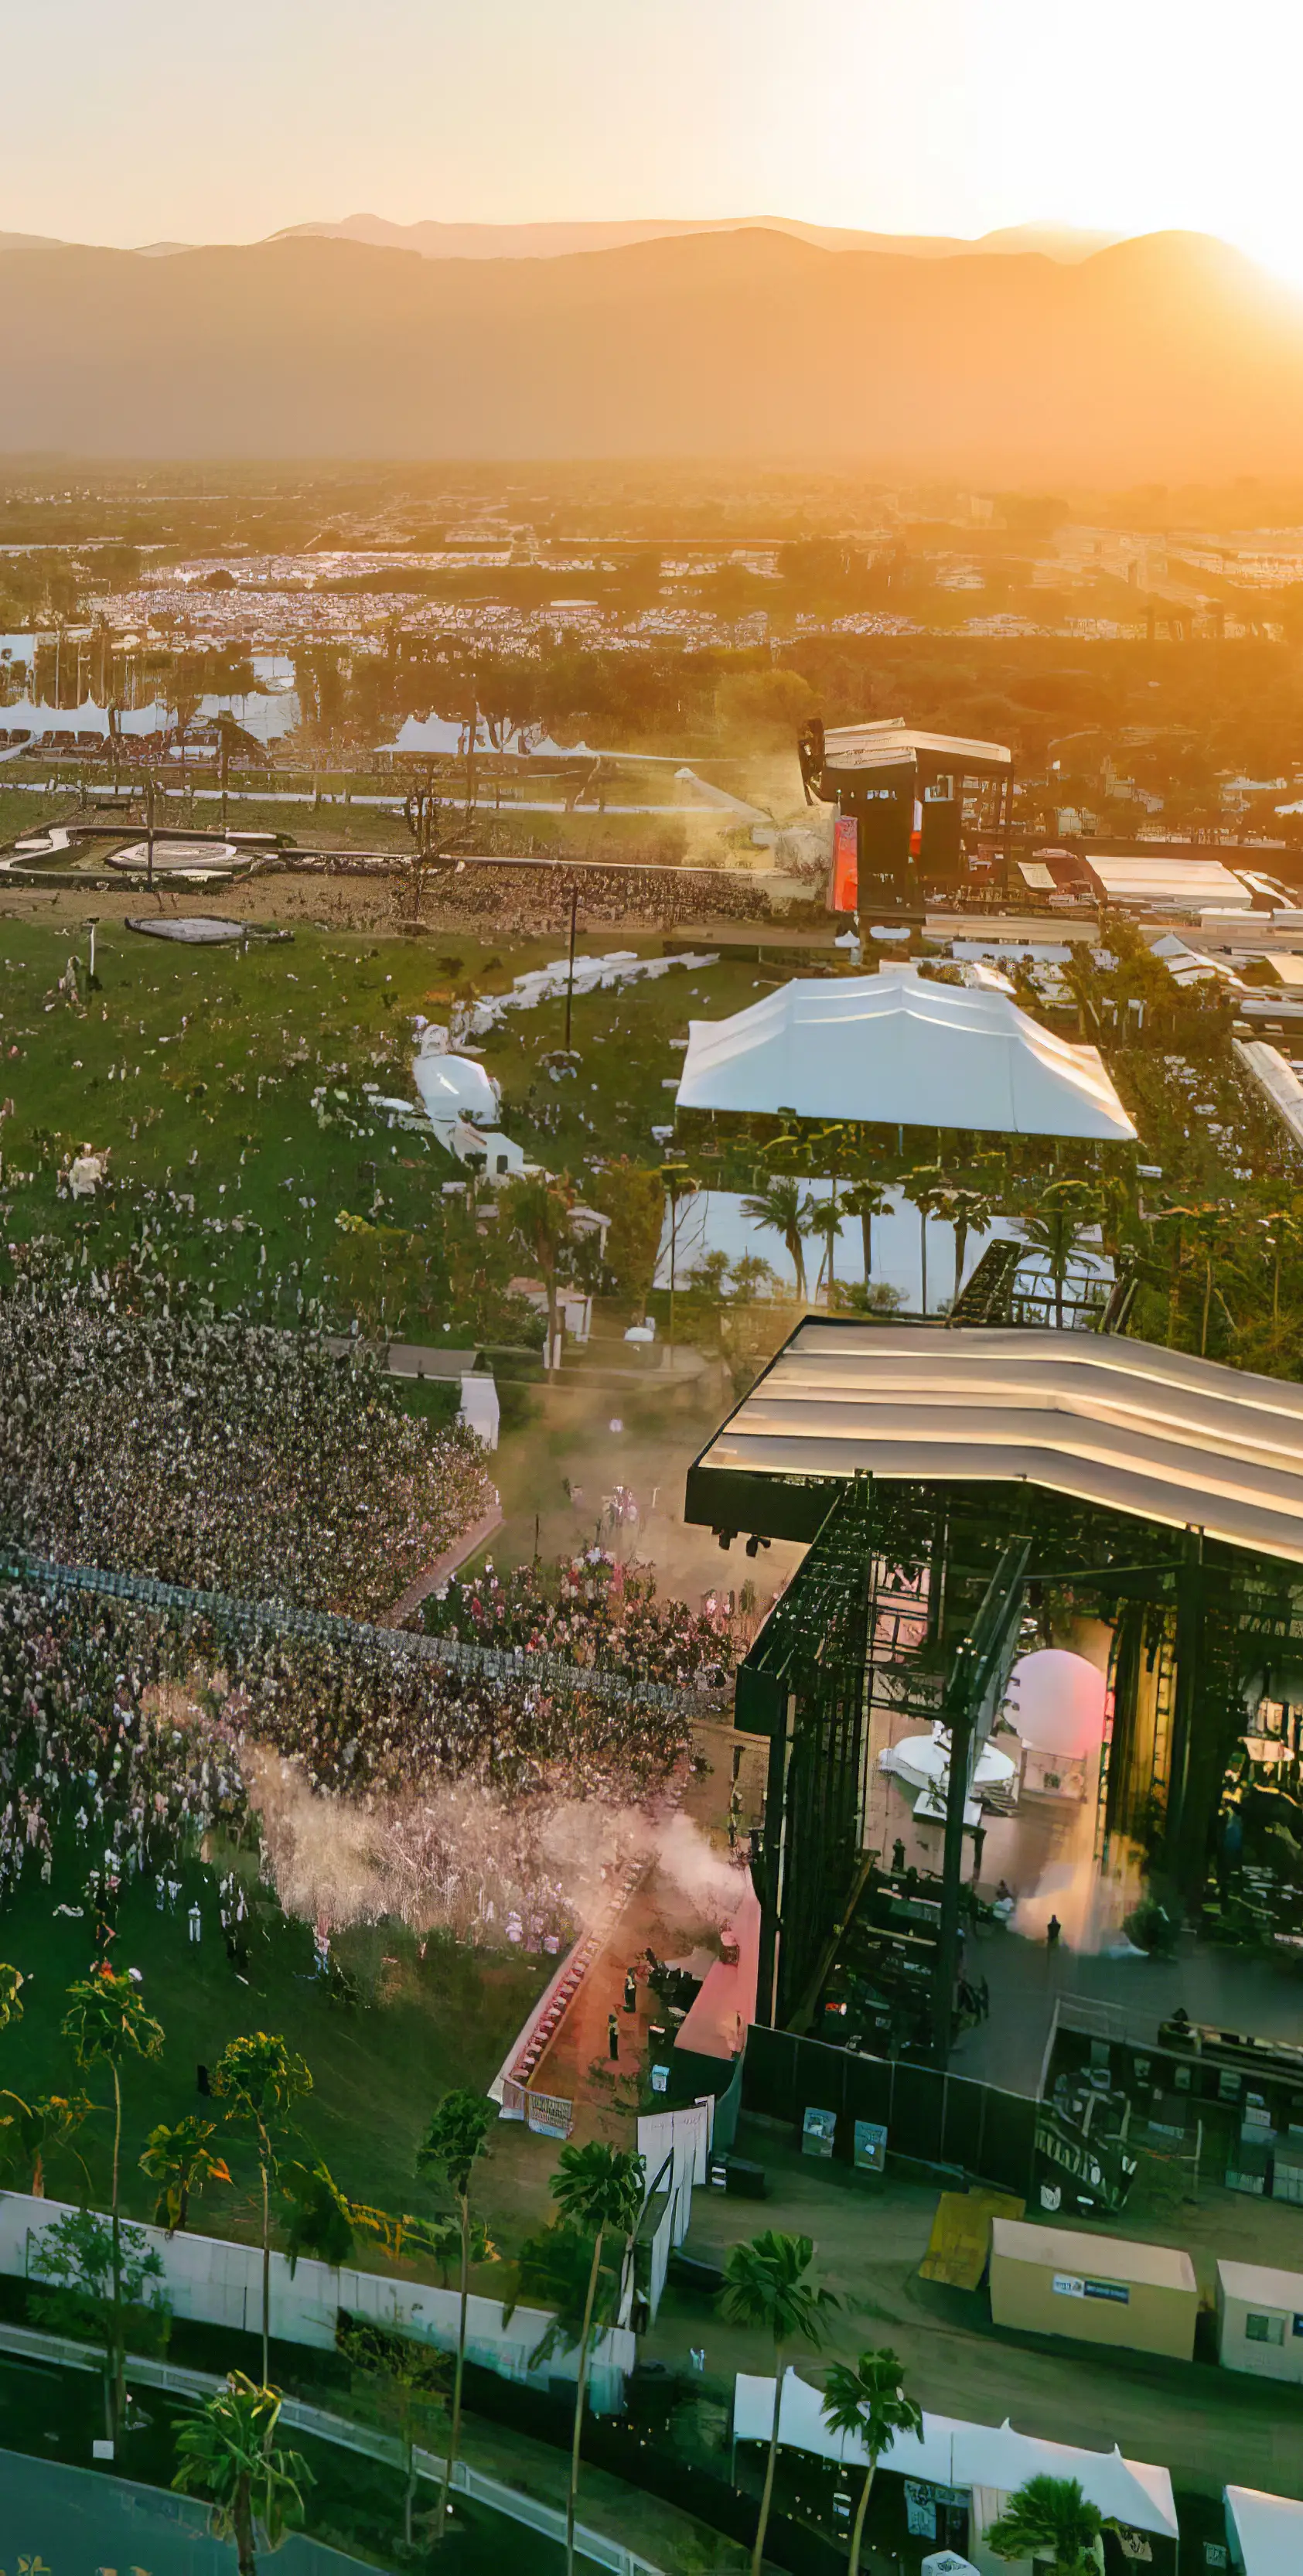 An image of large crowds watching on-stage performances at Coachella festival, while the sun sets over Indio, California.